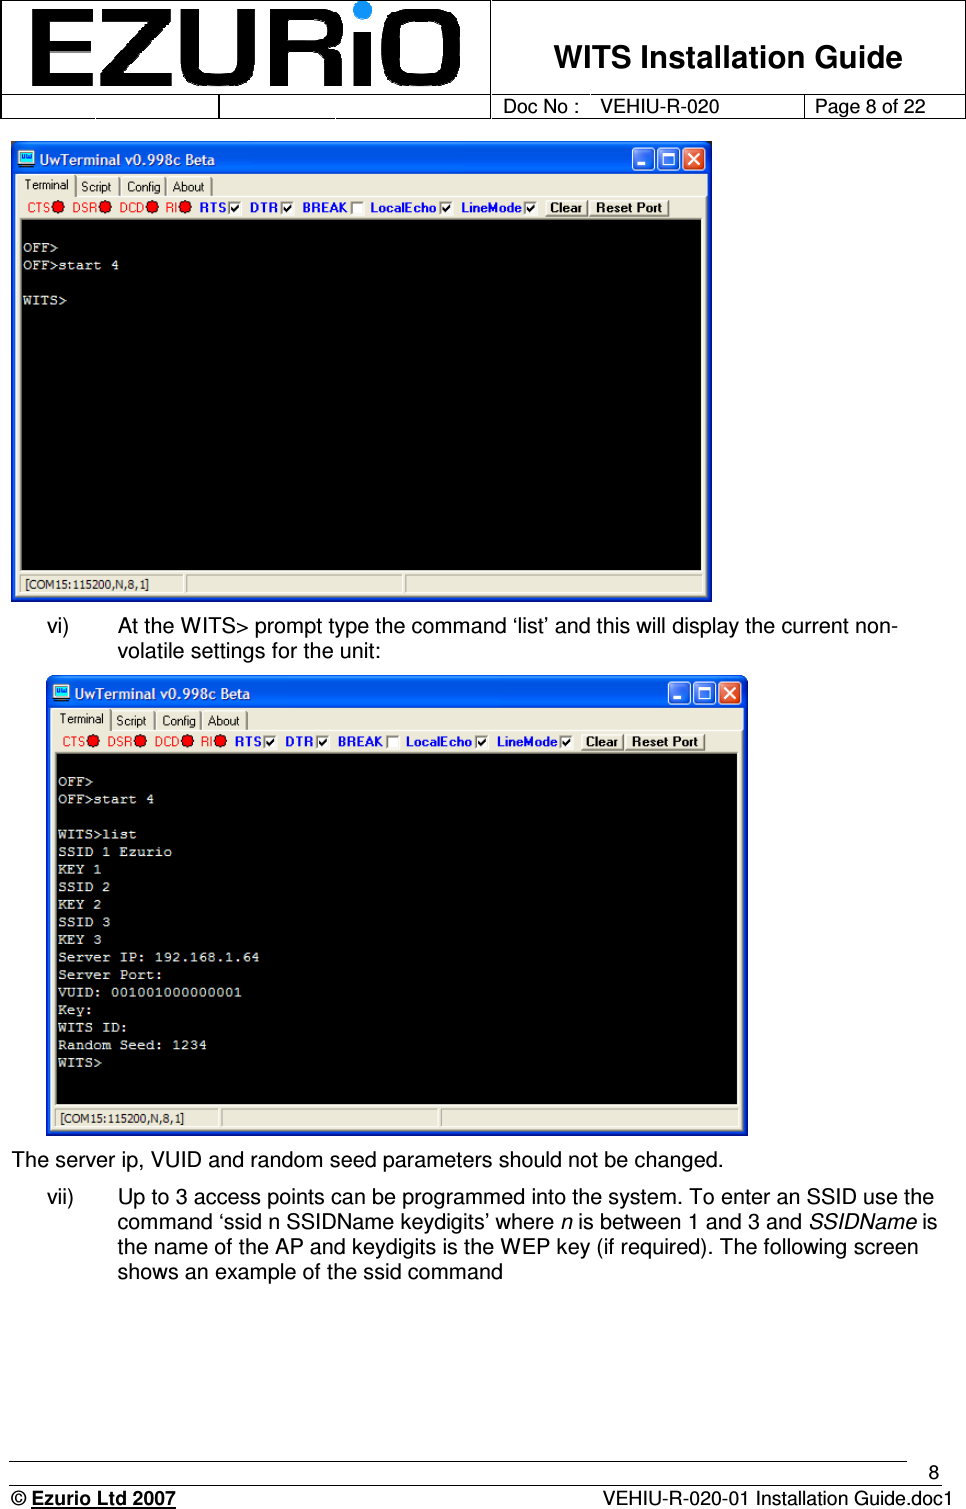    WITS Installation Guide         Doc No : VEHIU-R-020 Page 8 of 22      © Ezurio Ltd 2007  VEHIU-R-020-01 Installation Guide.doc1 8  vi)  At the WITS&gt; prompt type the command ‘list’ and this will display the current non-volatile settings for the unit:  The server ip, VUID and random seed parameters should not be changed.  vii)  Up to 3 access points can be programmed into the system. To enter an SSID use the command ‘ssid n SSIDName keydigits’ where n is between 1 and 3 and SSIDName is the name of the AP and keydigits is the WEP key (if required). The following screen shows an example of the ssid command 